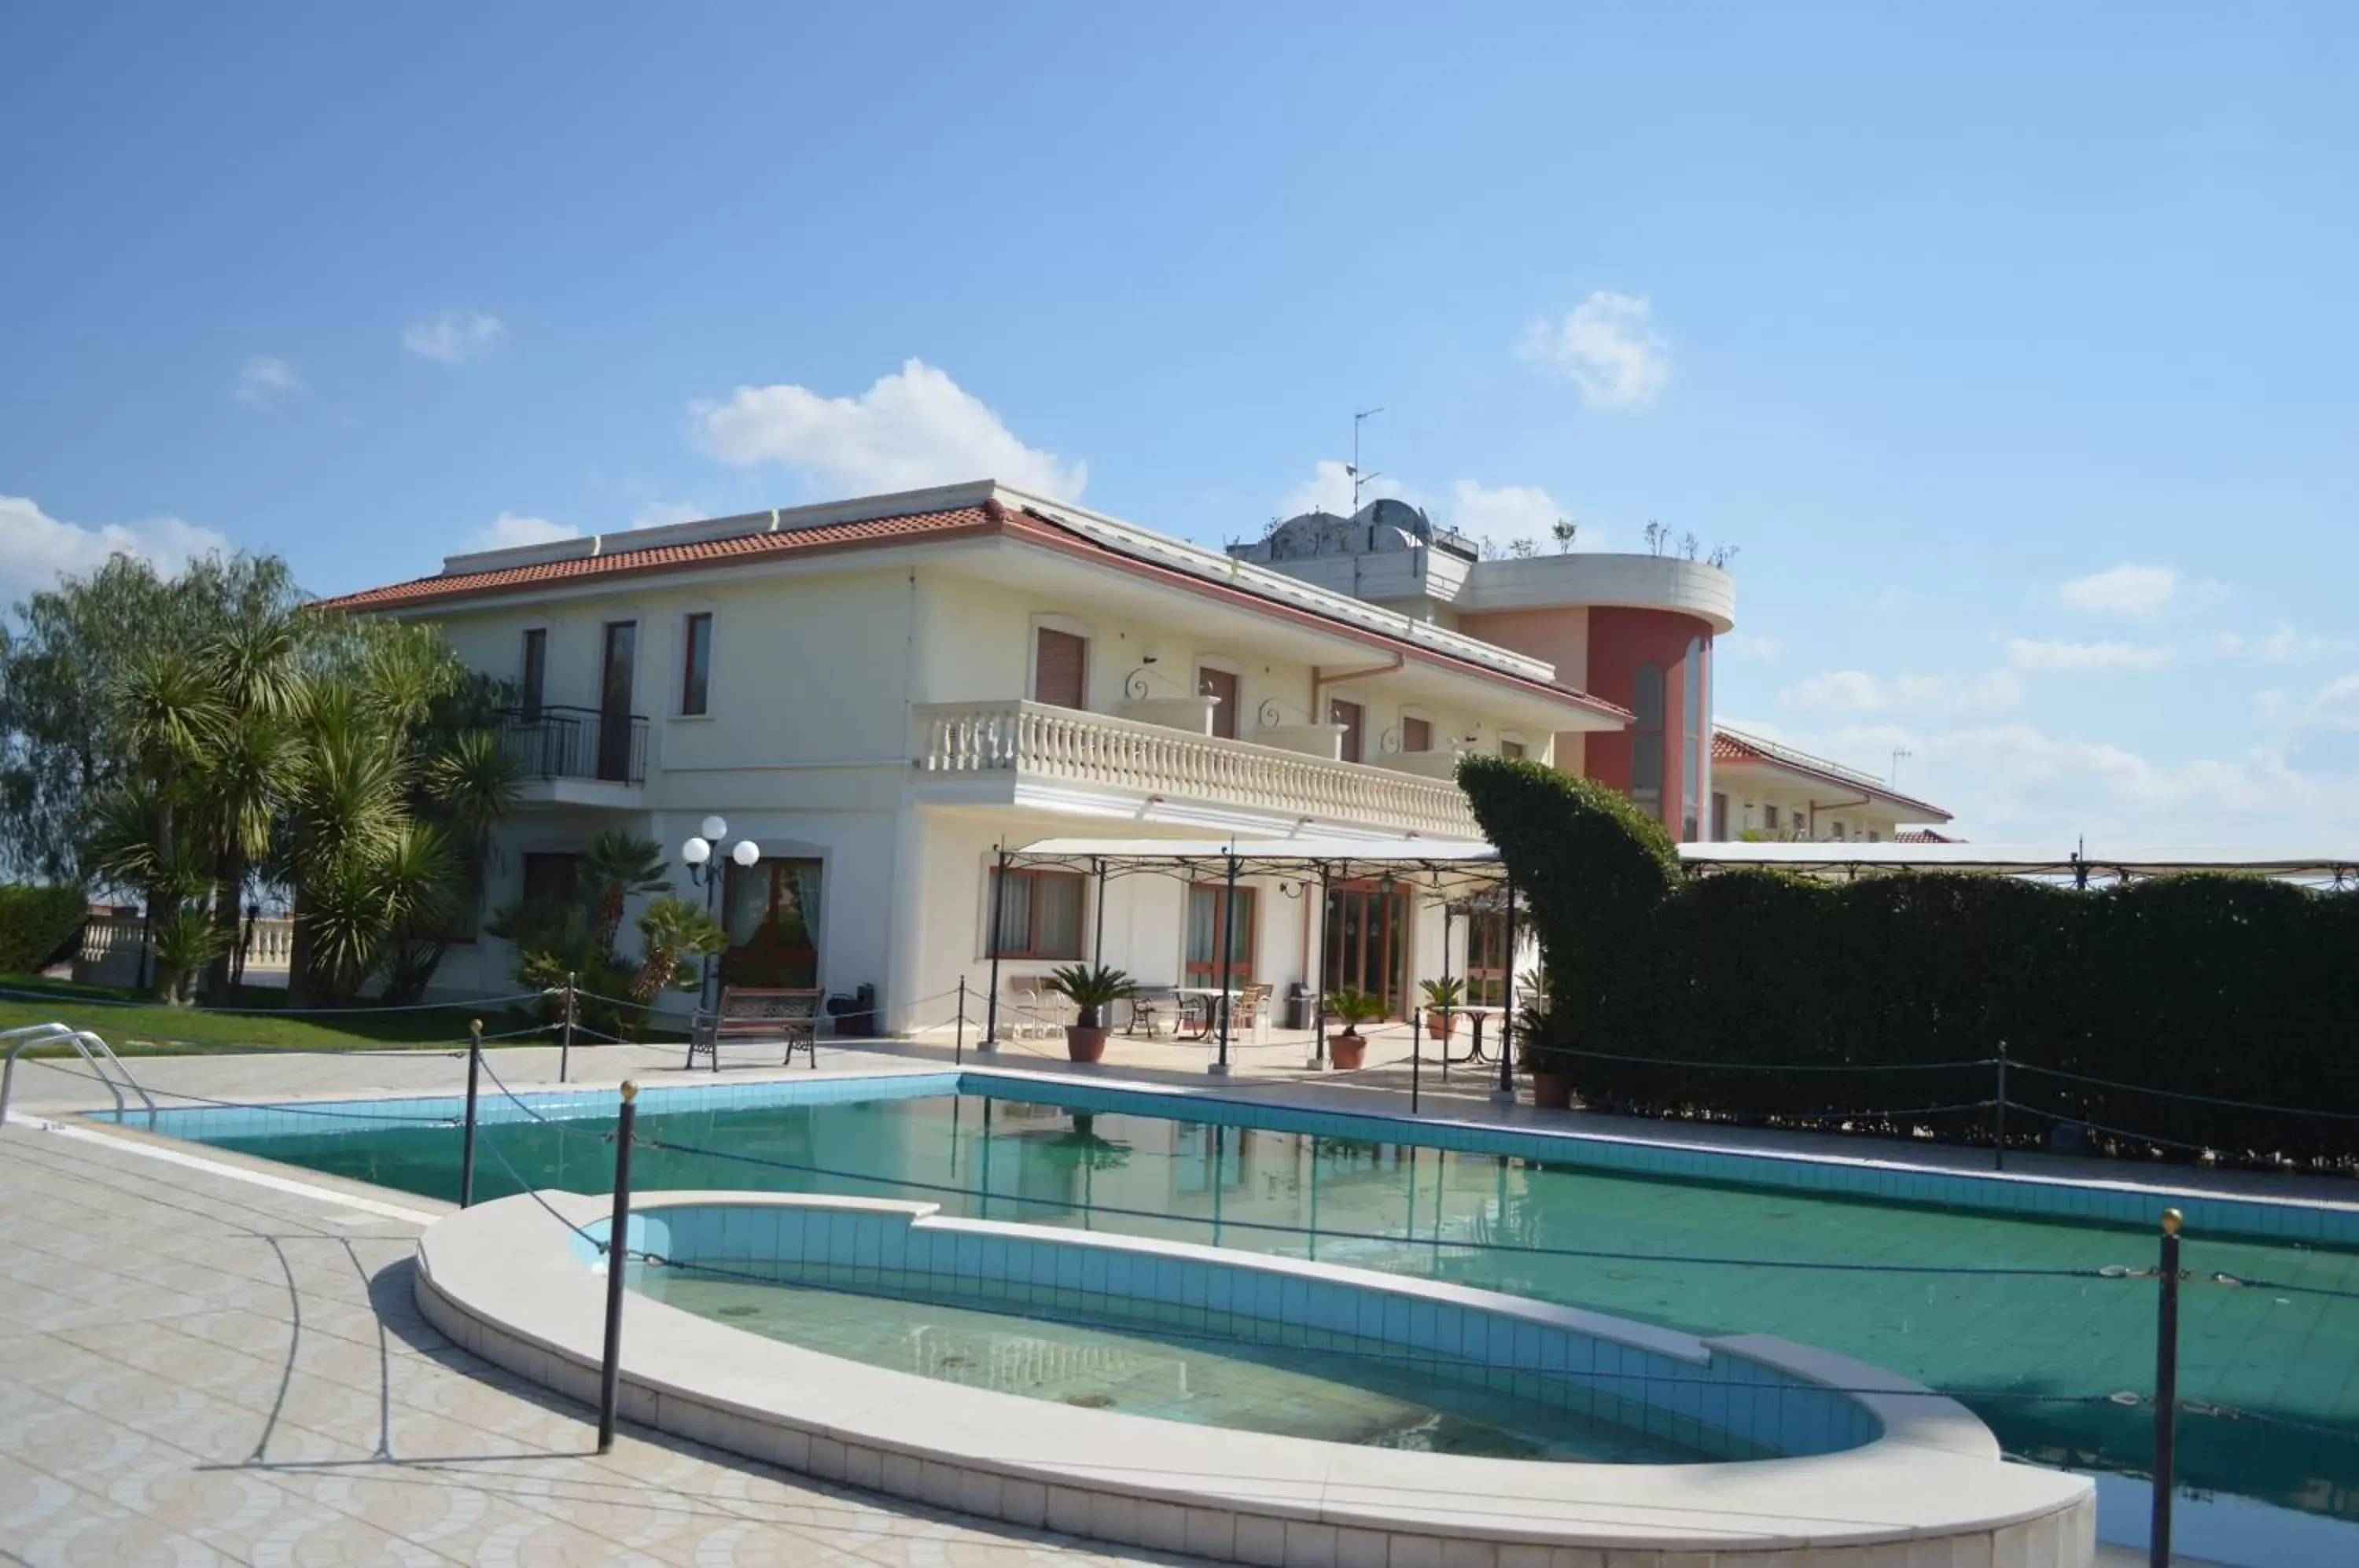 Property building, Swimming Pool in Hotel Parco Serrone